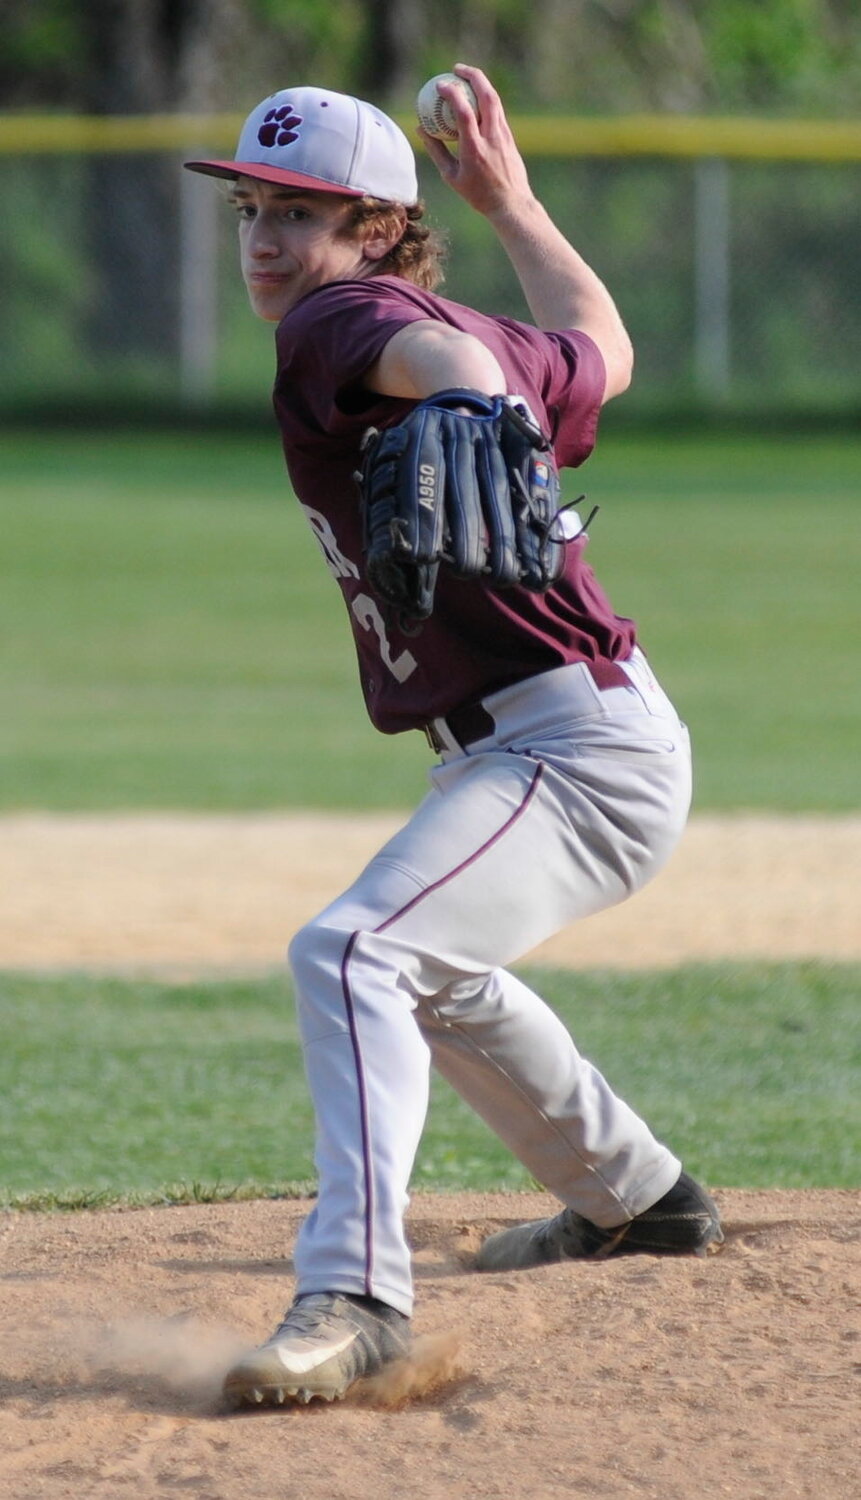 Hurler #3. Wildcats pitcher Logan Park is from the Manor, and closed out the game on the mound for the home team...